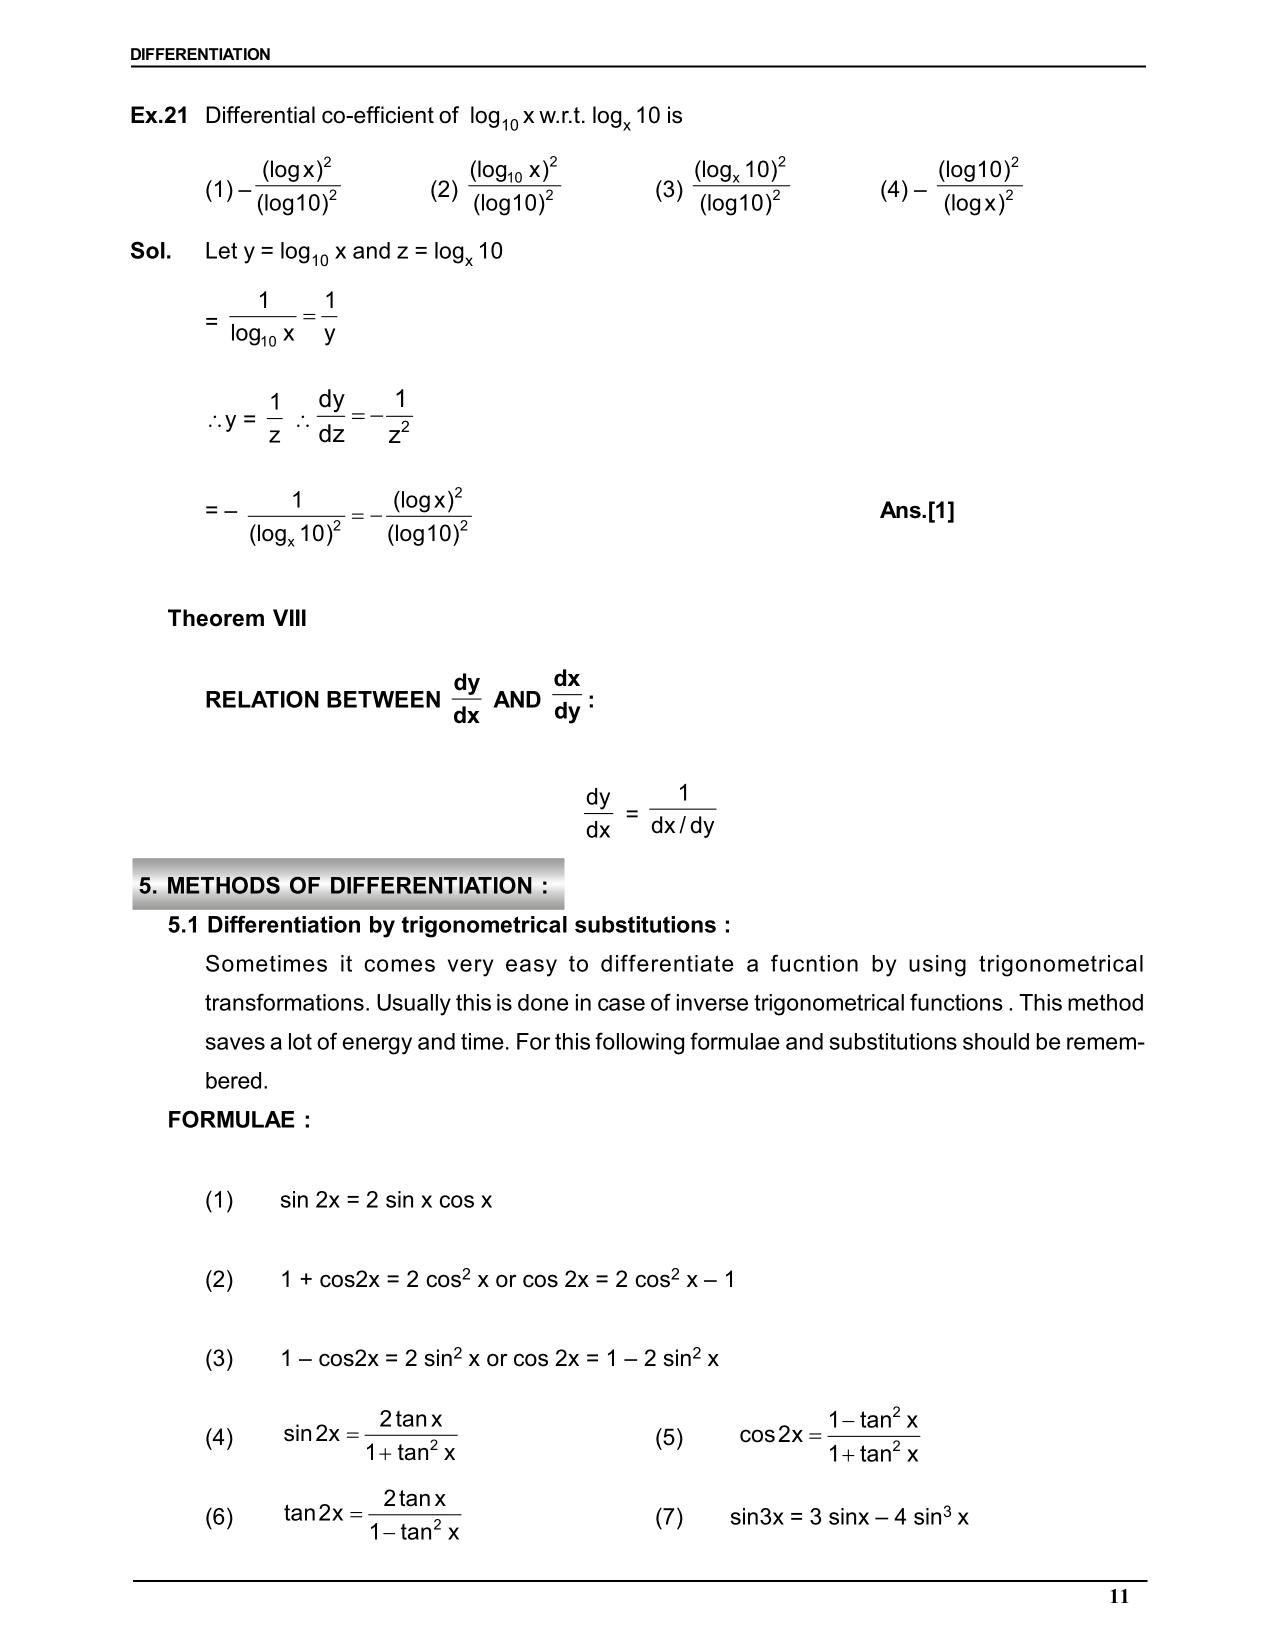 Continuity and Differentiability Class 12 Notes: Methods of Differentiation